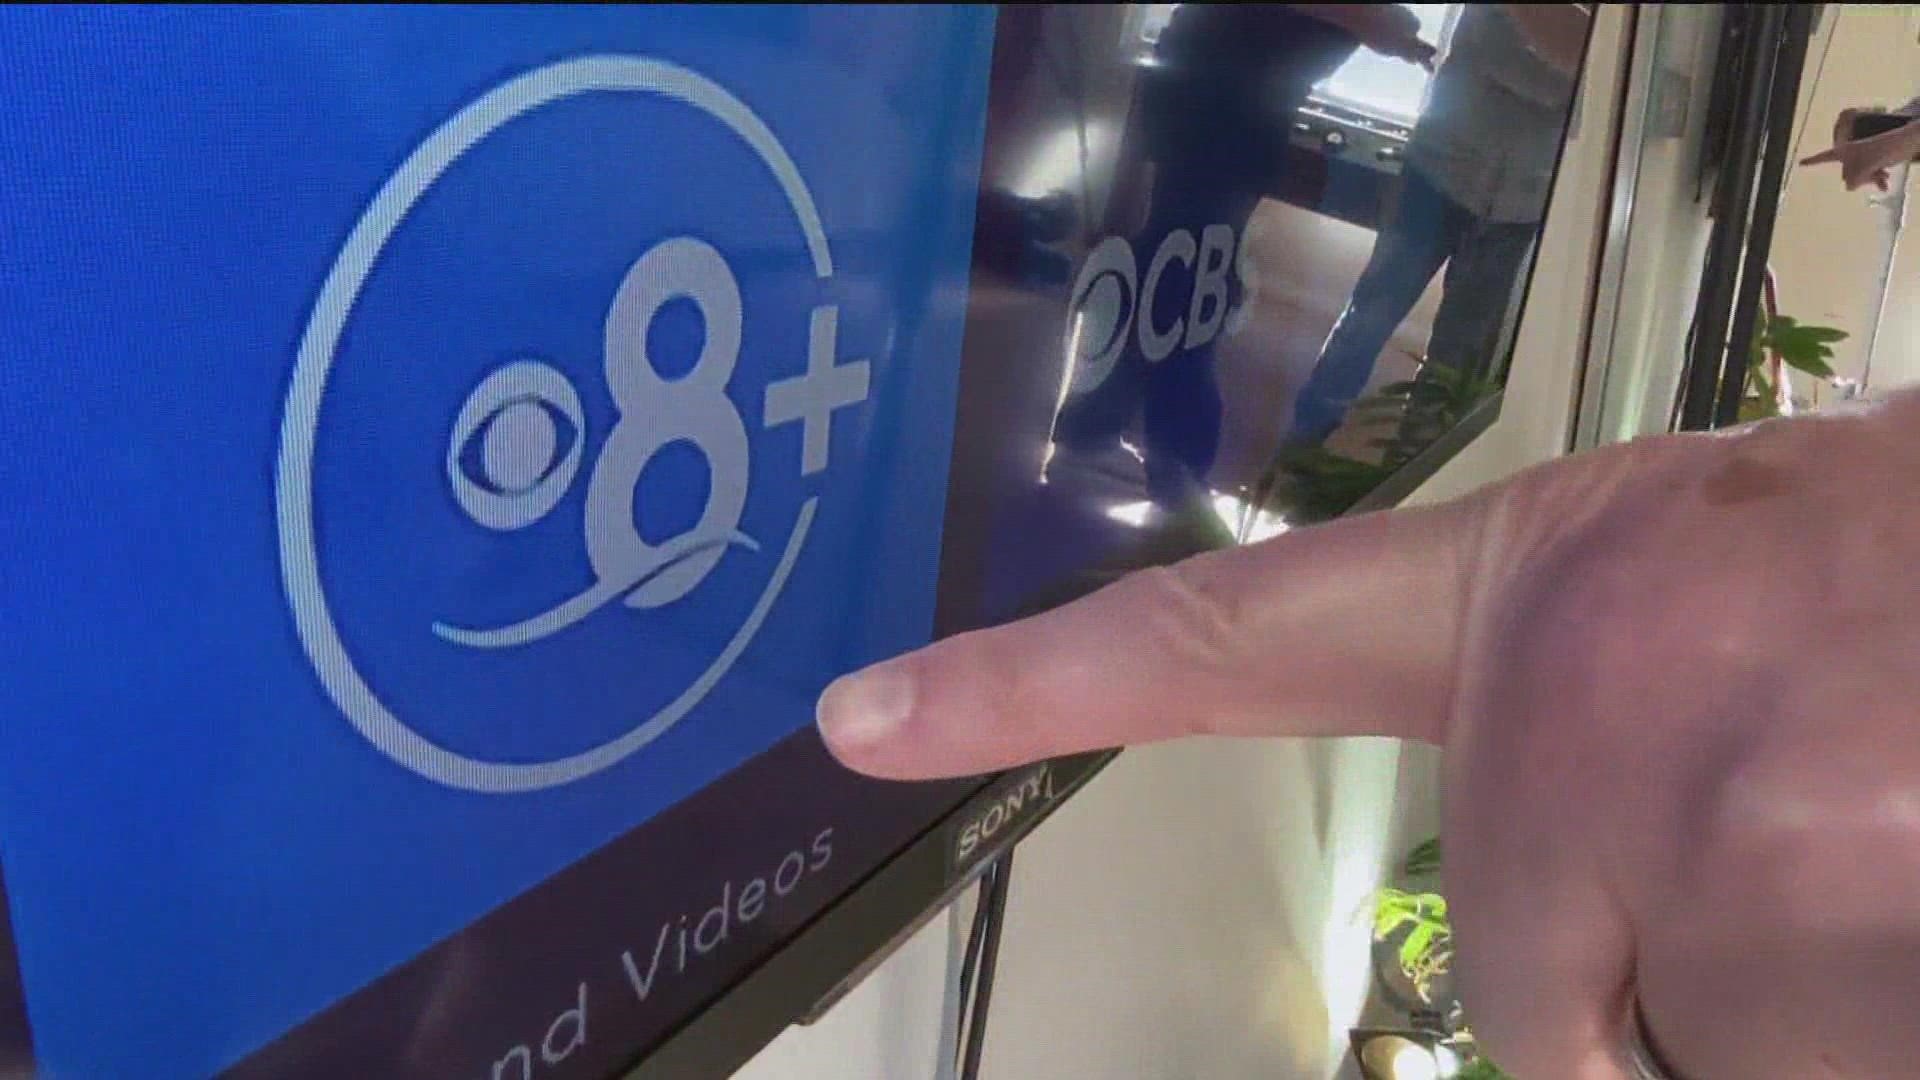 CBS8+ streaming platform offers free news, weather, sports and specials.